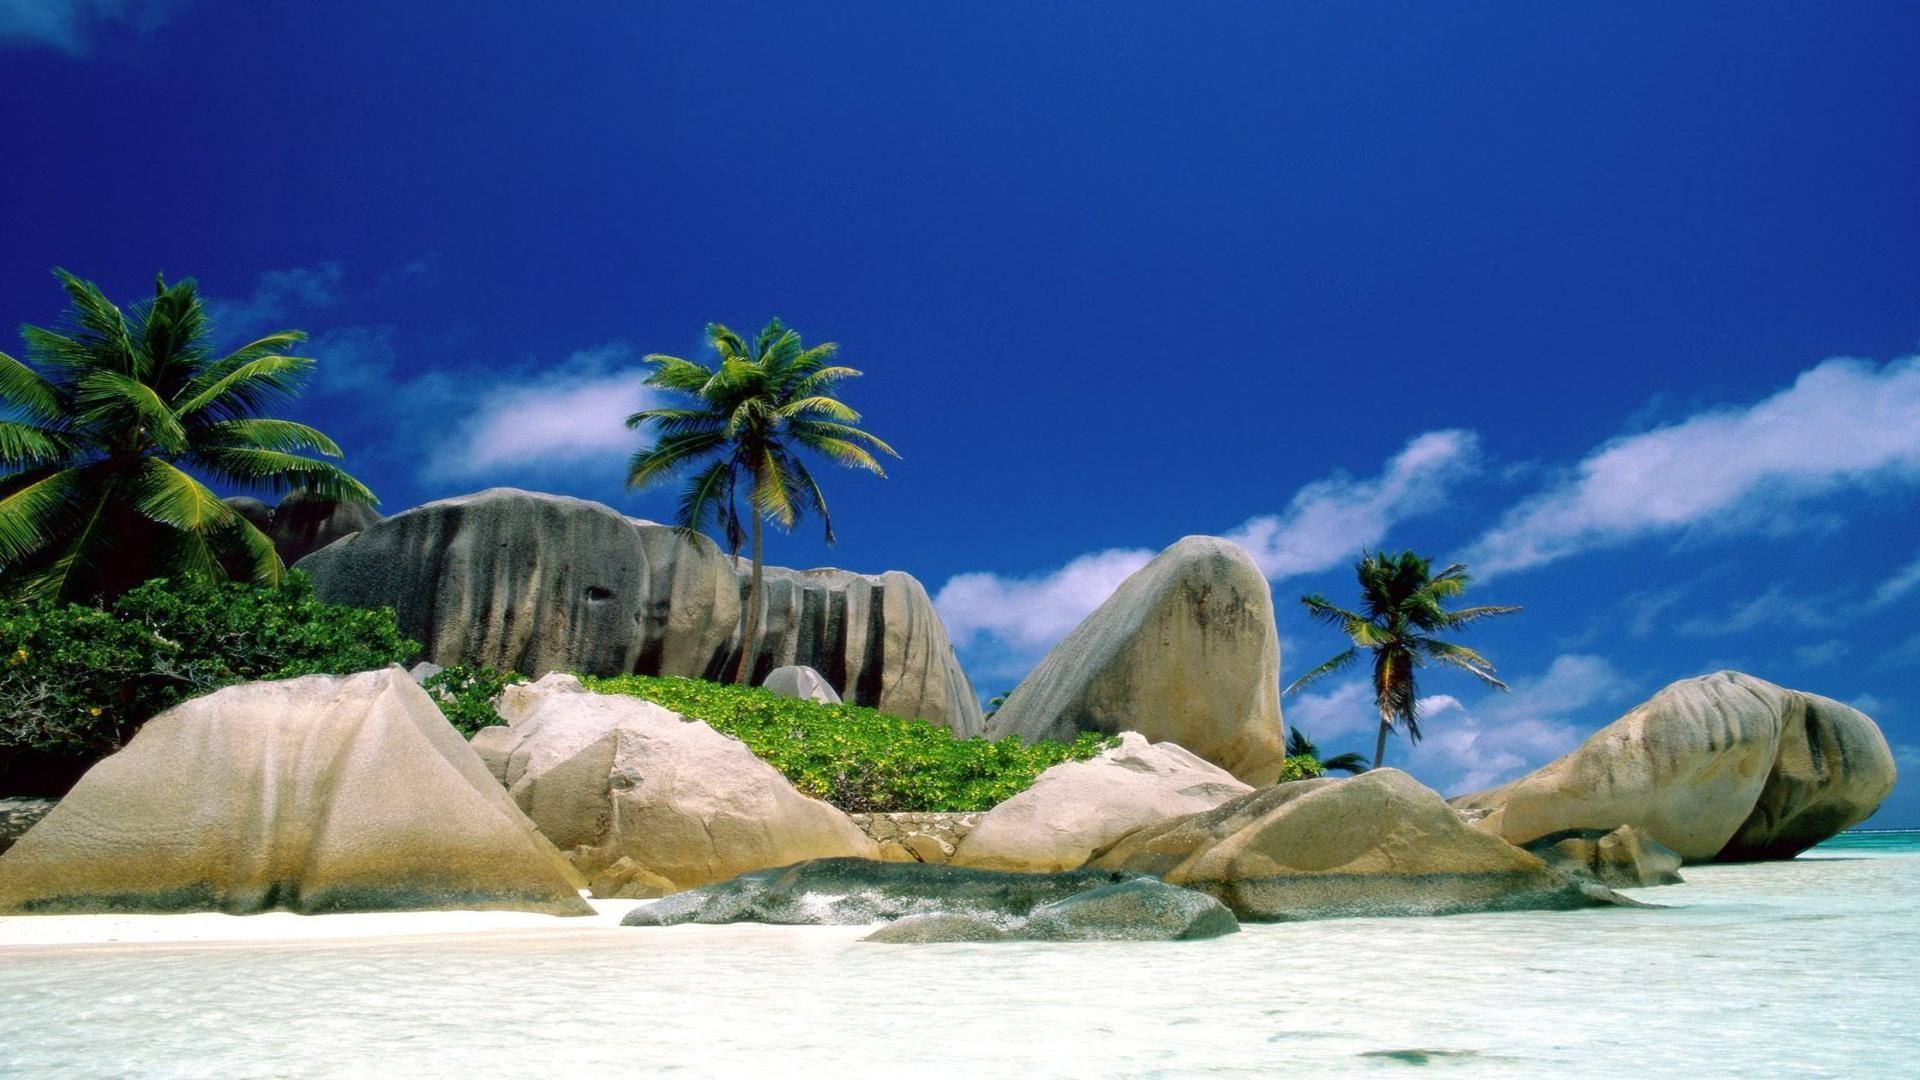 Tropical Island Paradise Background - wallpaper.